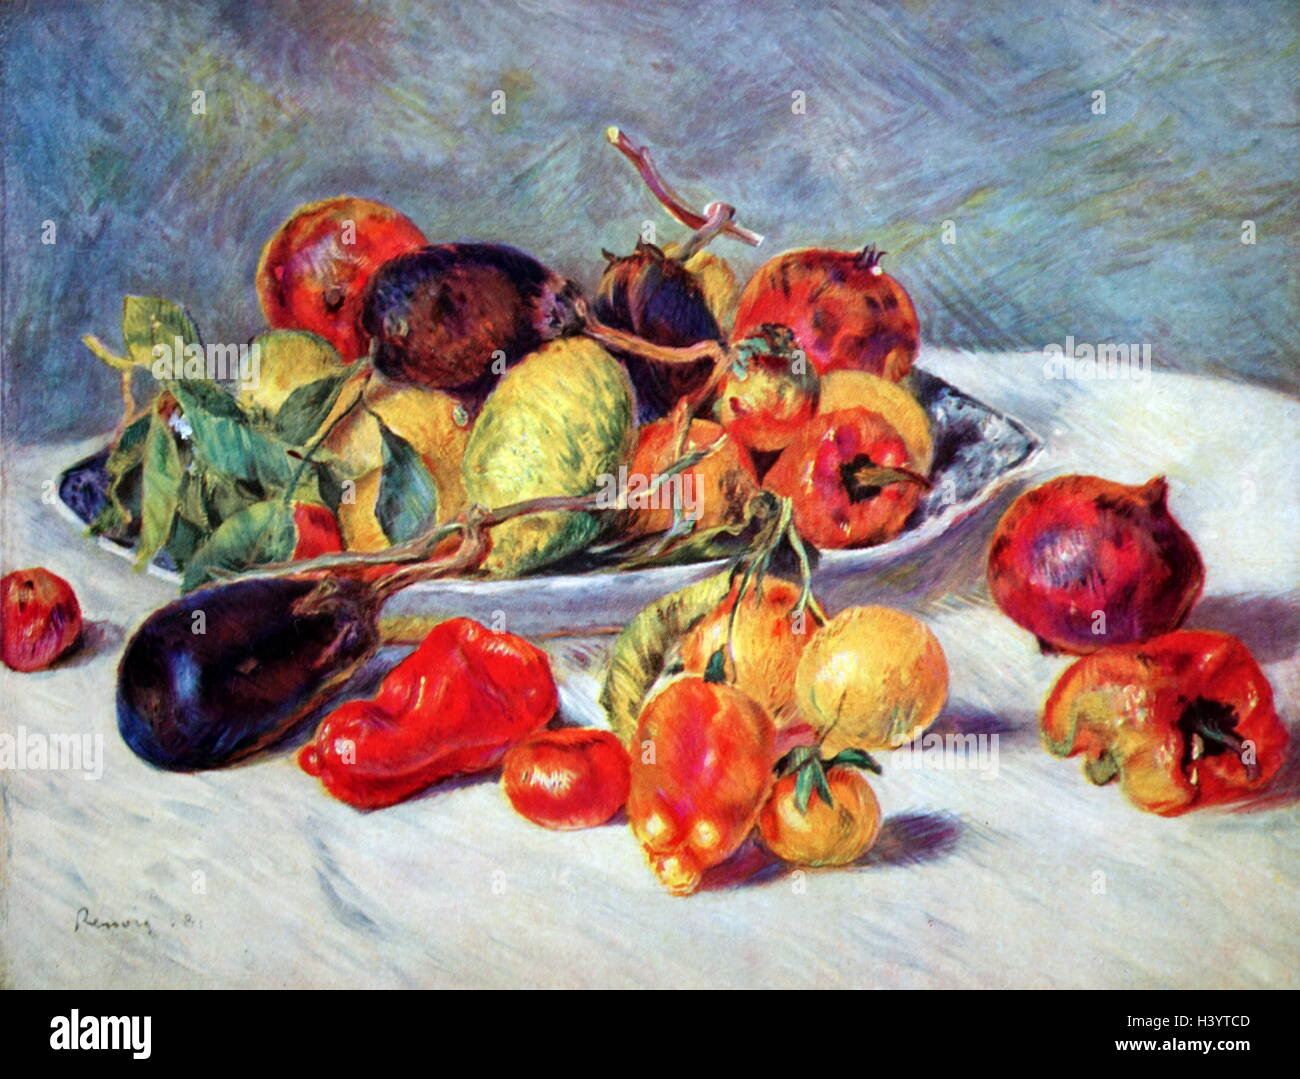 Painting titled 'Fruits of the Midi' by Pierre-Auguste Renoir (1841-1919) a French artist. Dated 19th Century Stock Photo